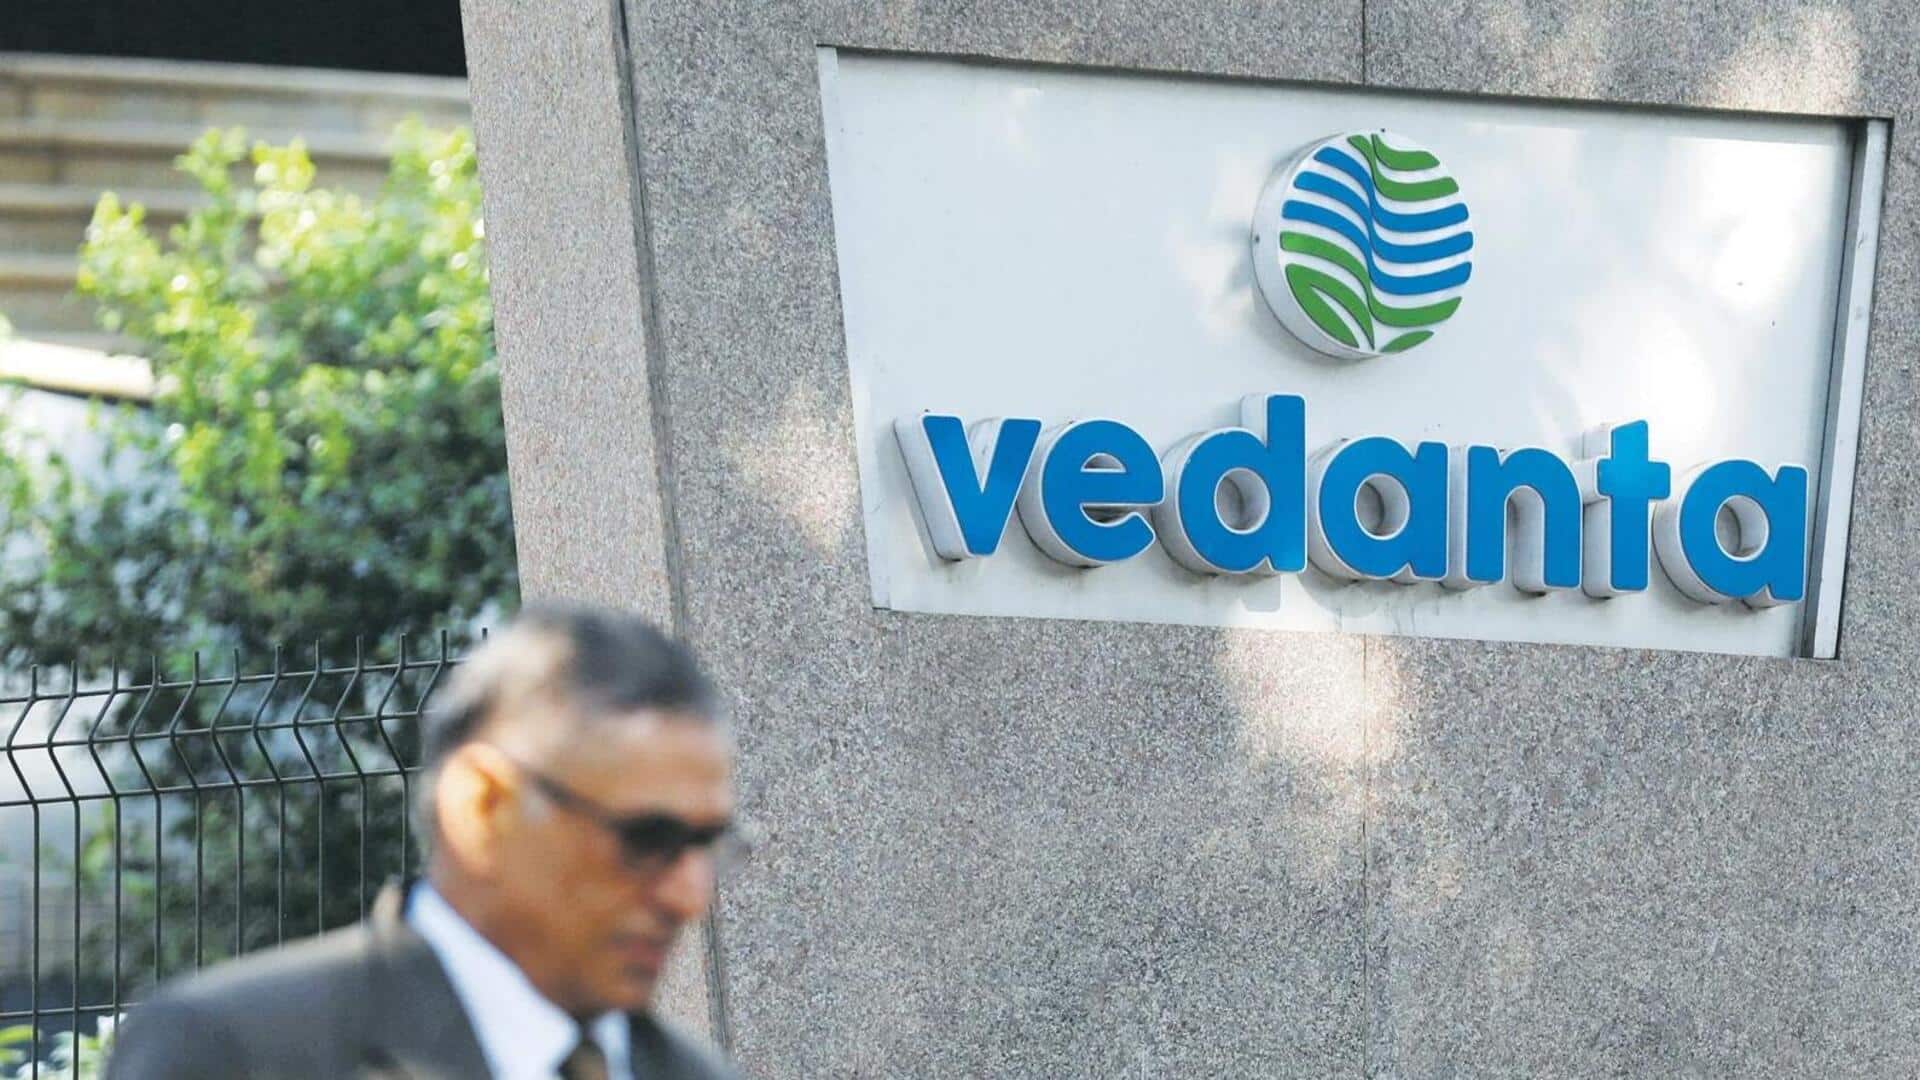 Vedanta taps JPMorgan for advice on its business overhaul